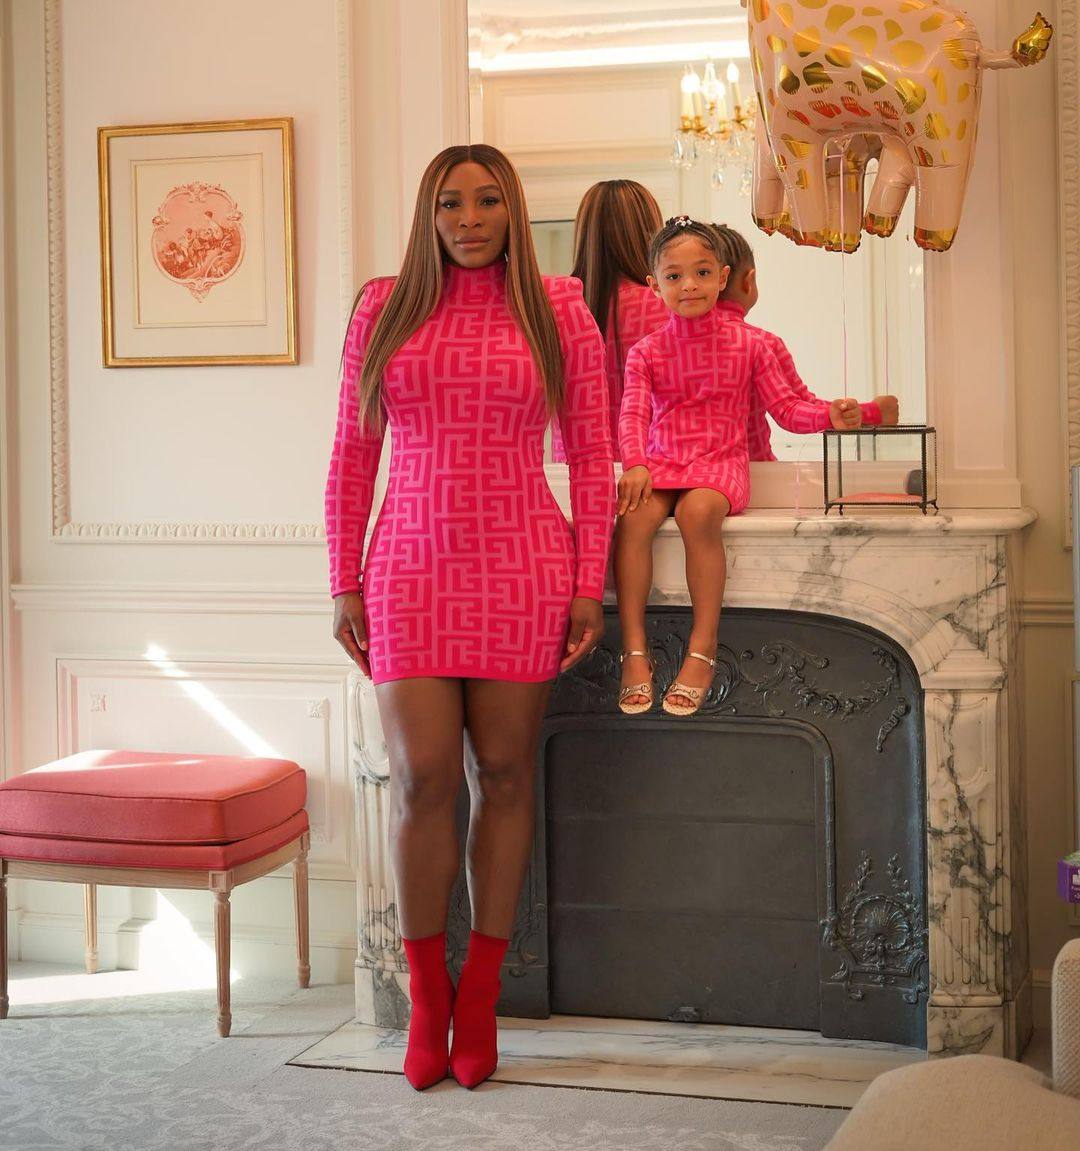 Alexis Olympia Ohanian Jr. is already a young fashionista, regularly twinning with her mum, tennis great Serena Williams. Photo: @serenawilliams/Instagram